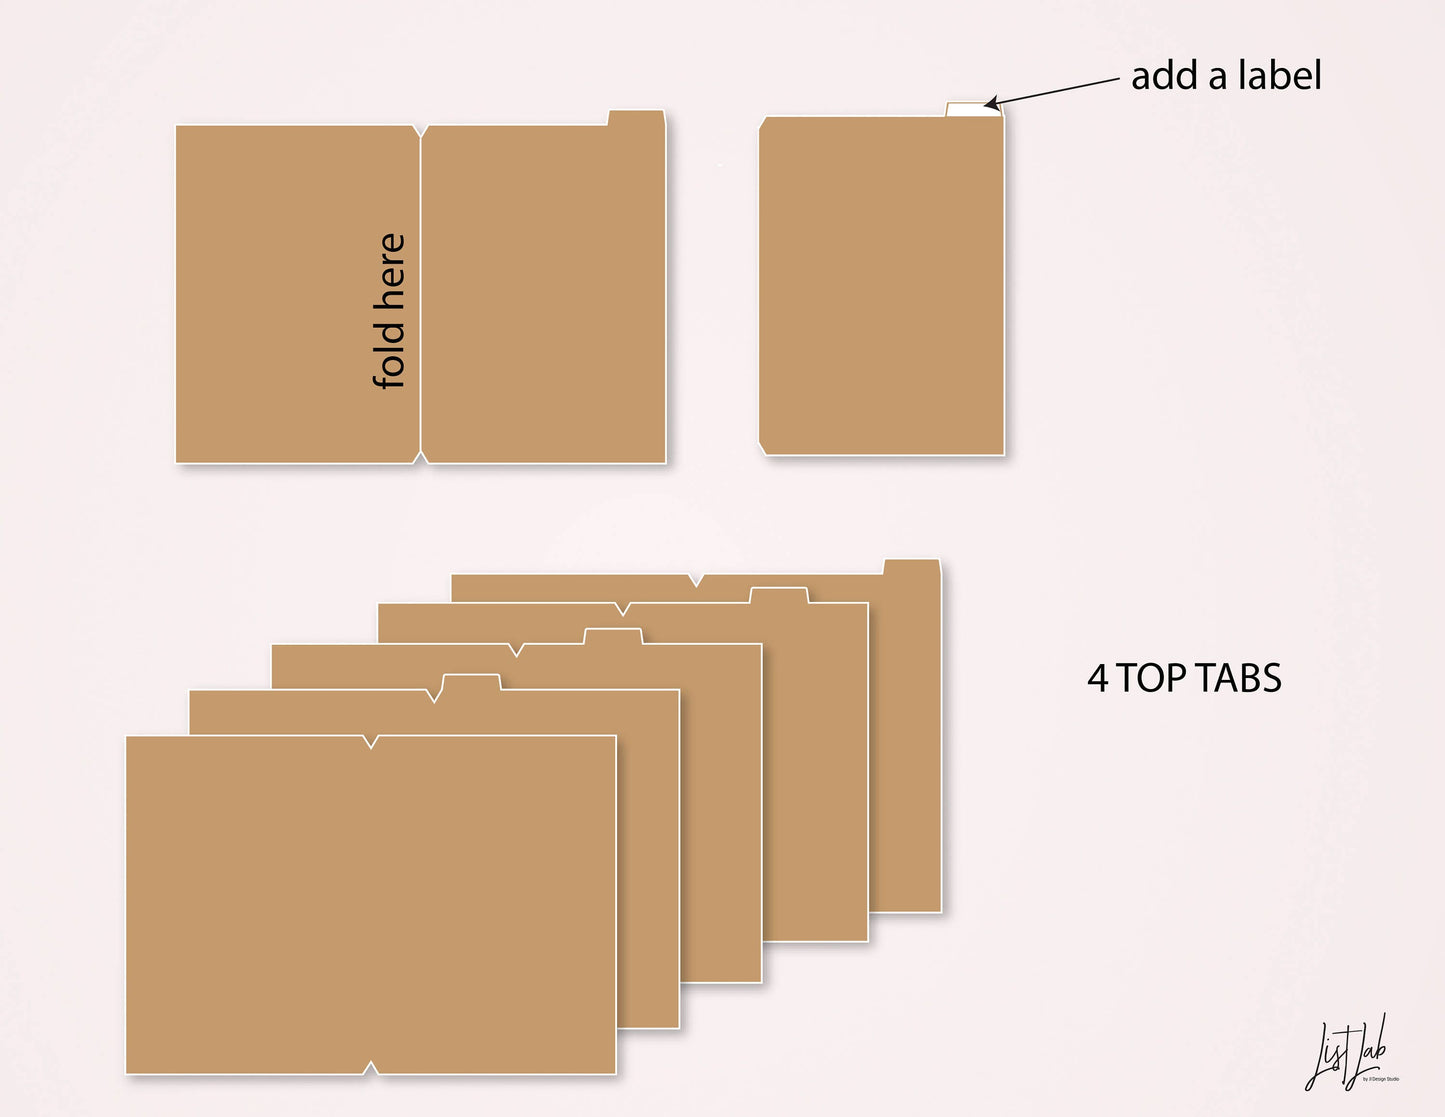 A6 TN TOP Tabbed Covers Kit Cutting Files Set